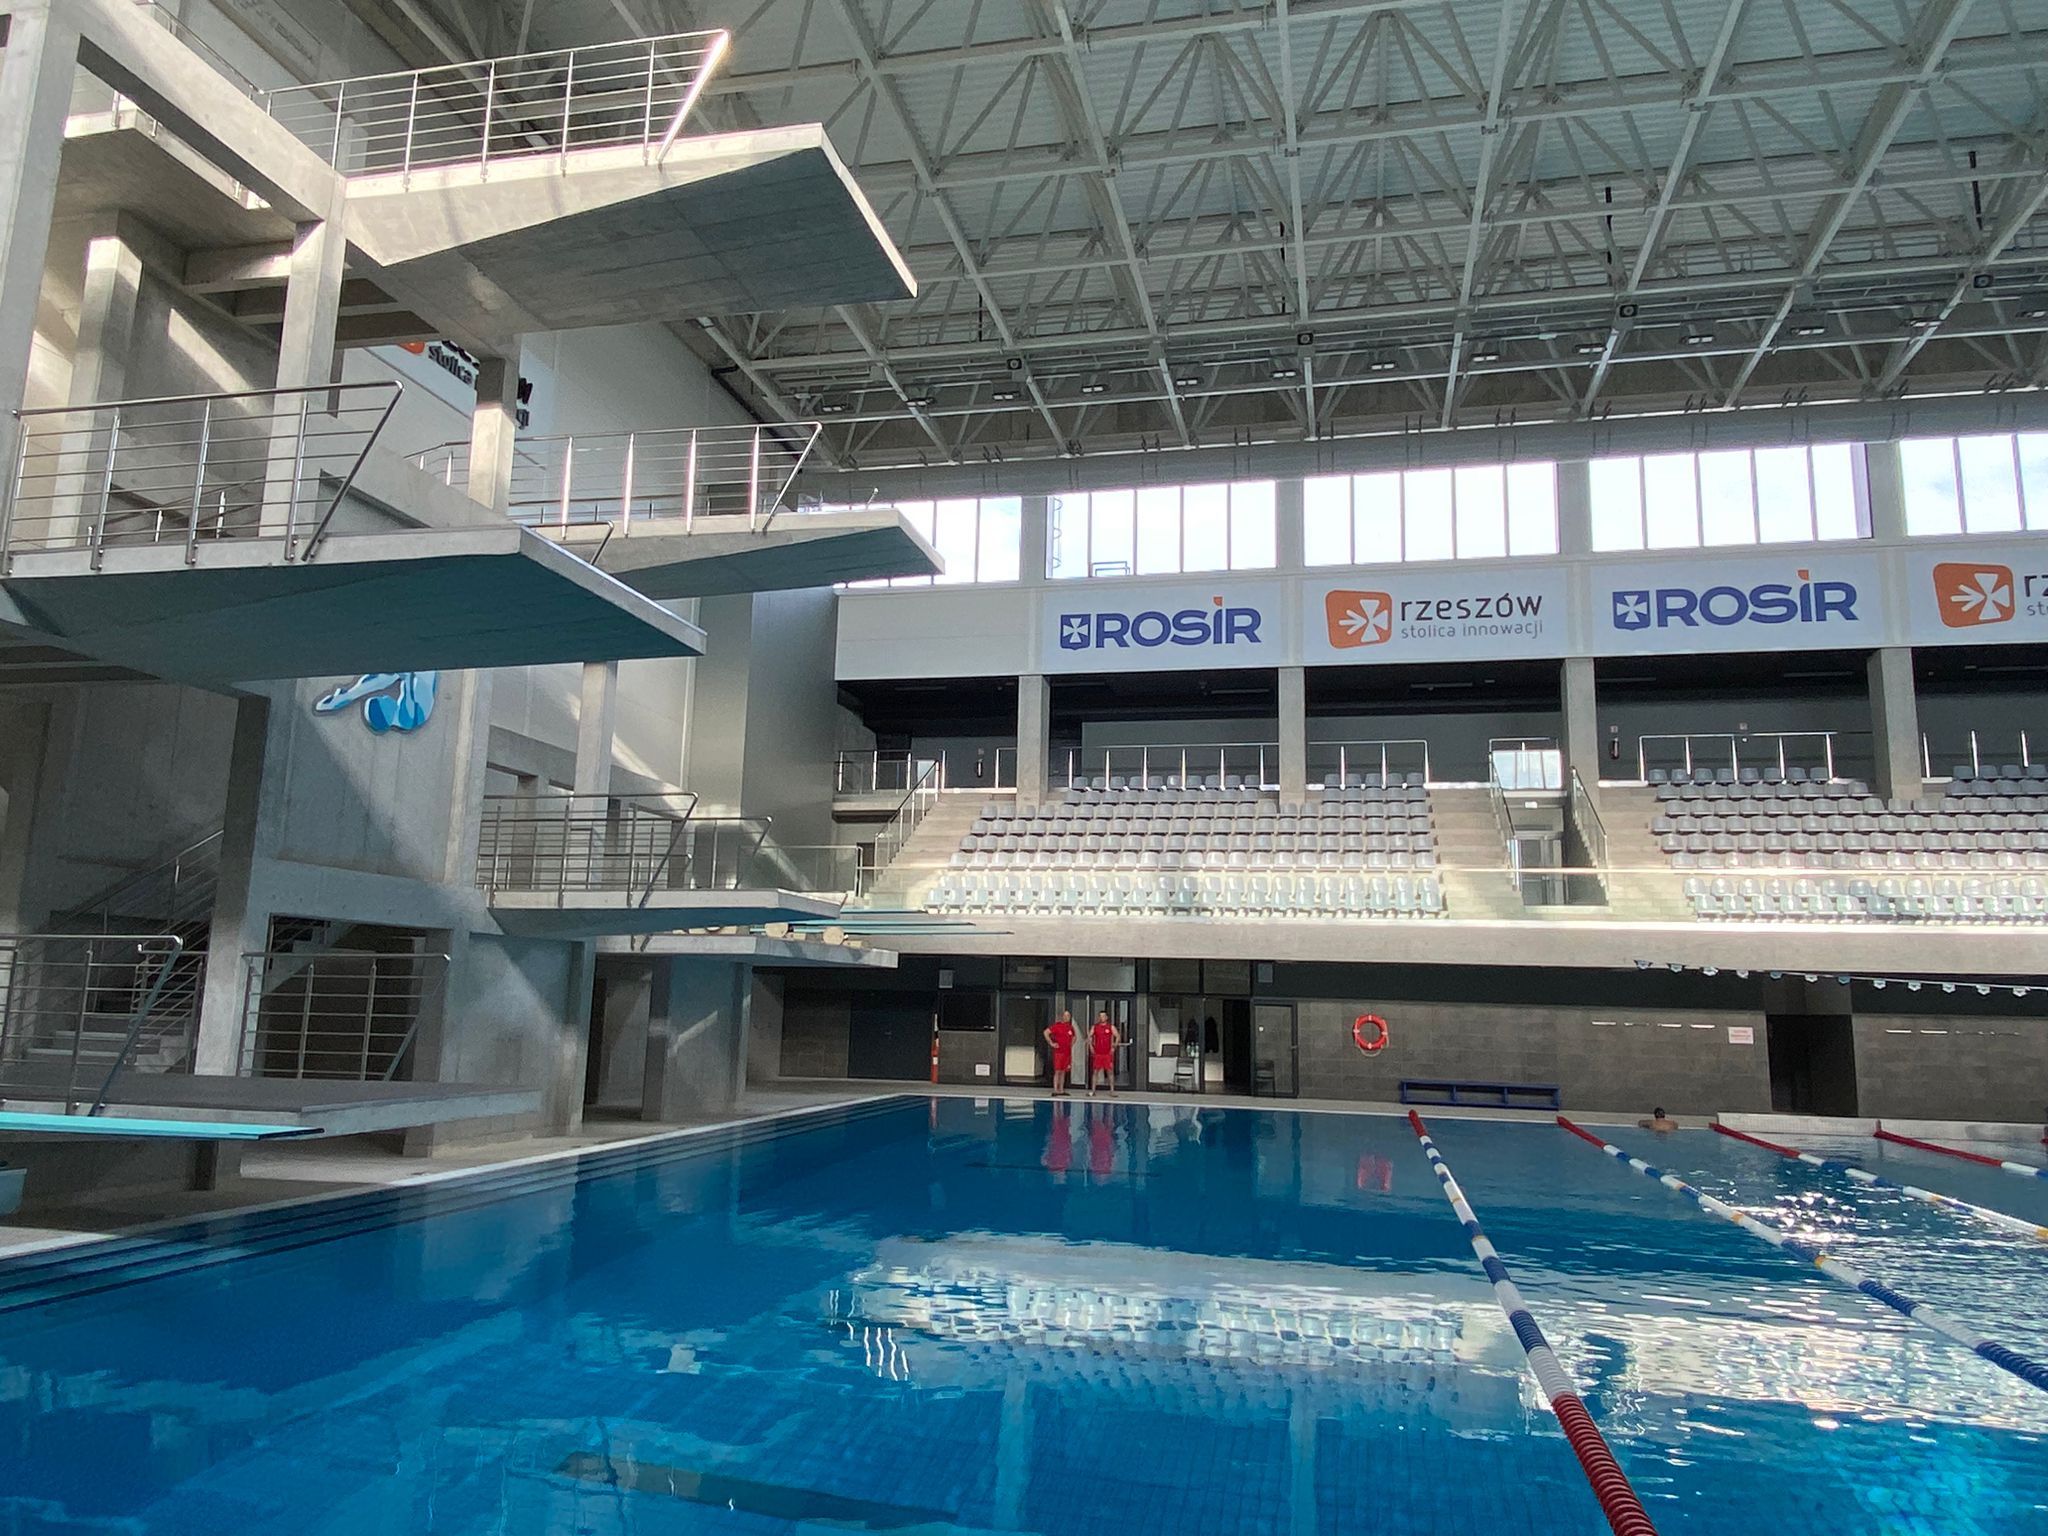 The swimming pool where the diving competition will be held during IE2023 is now open